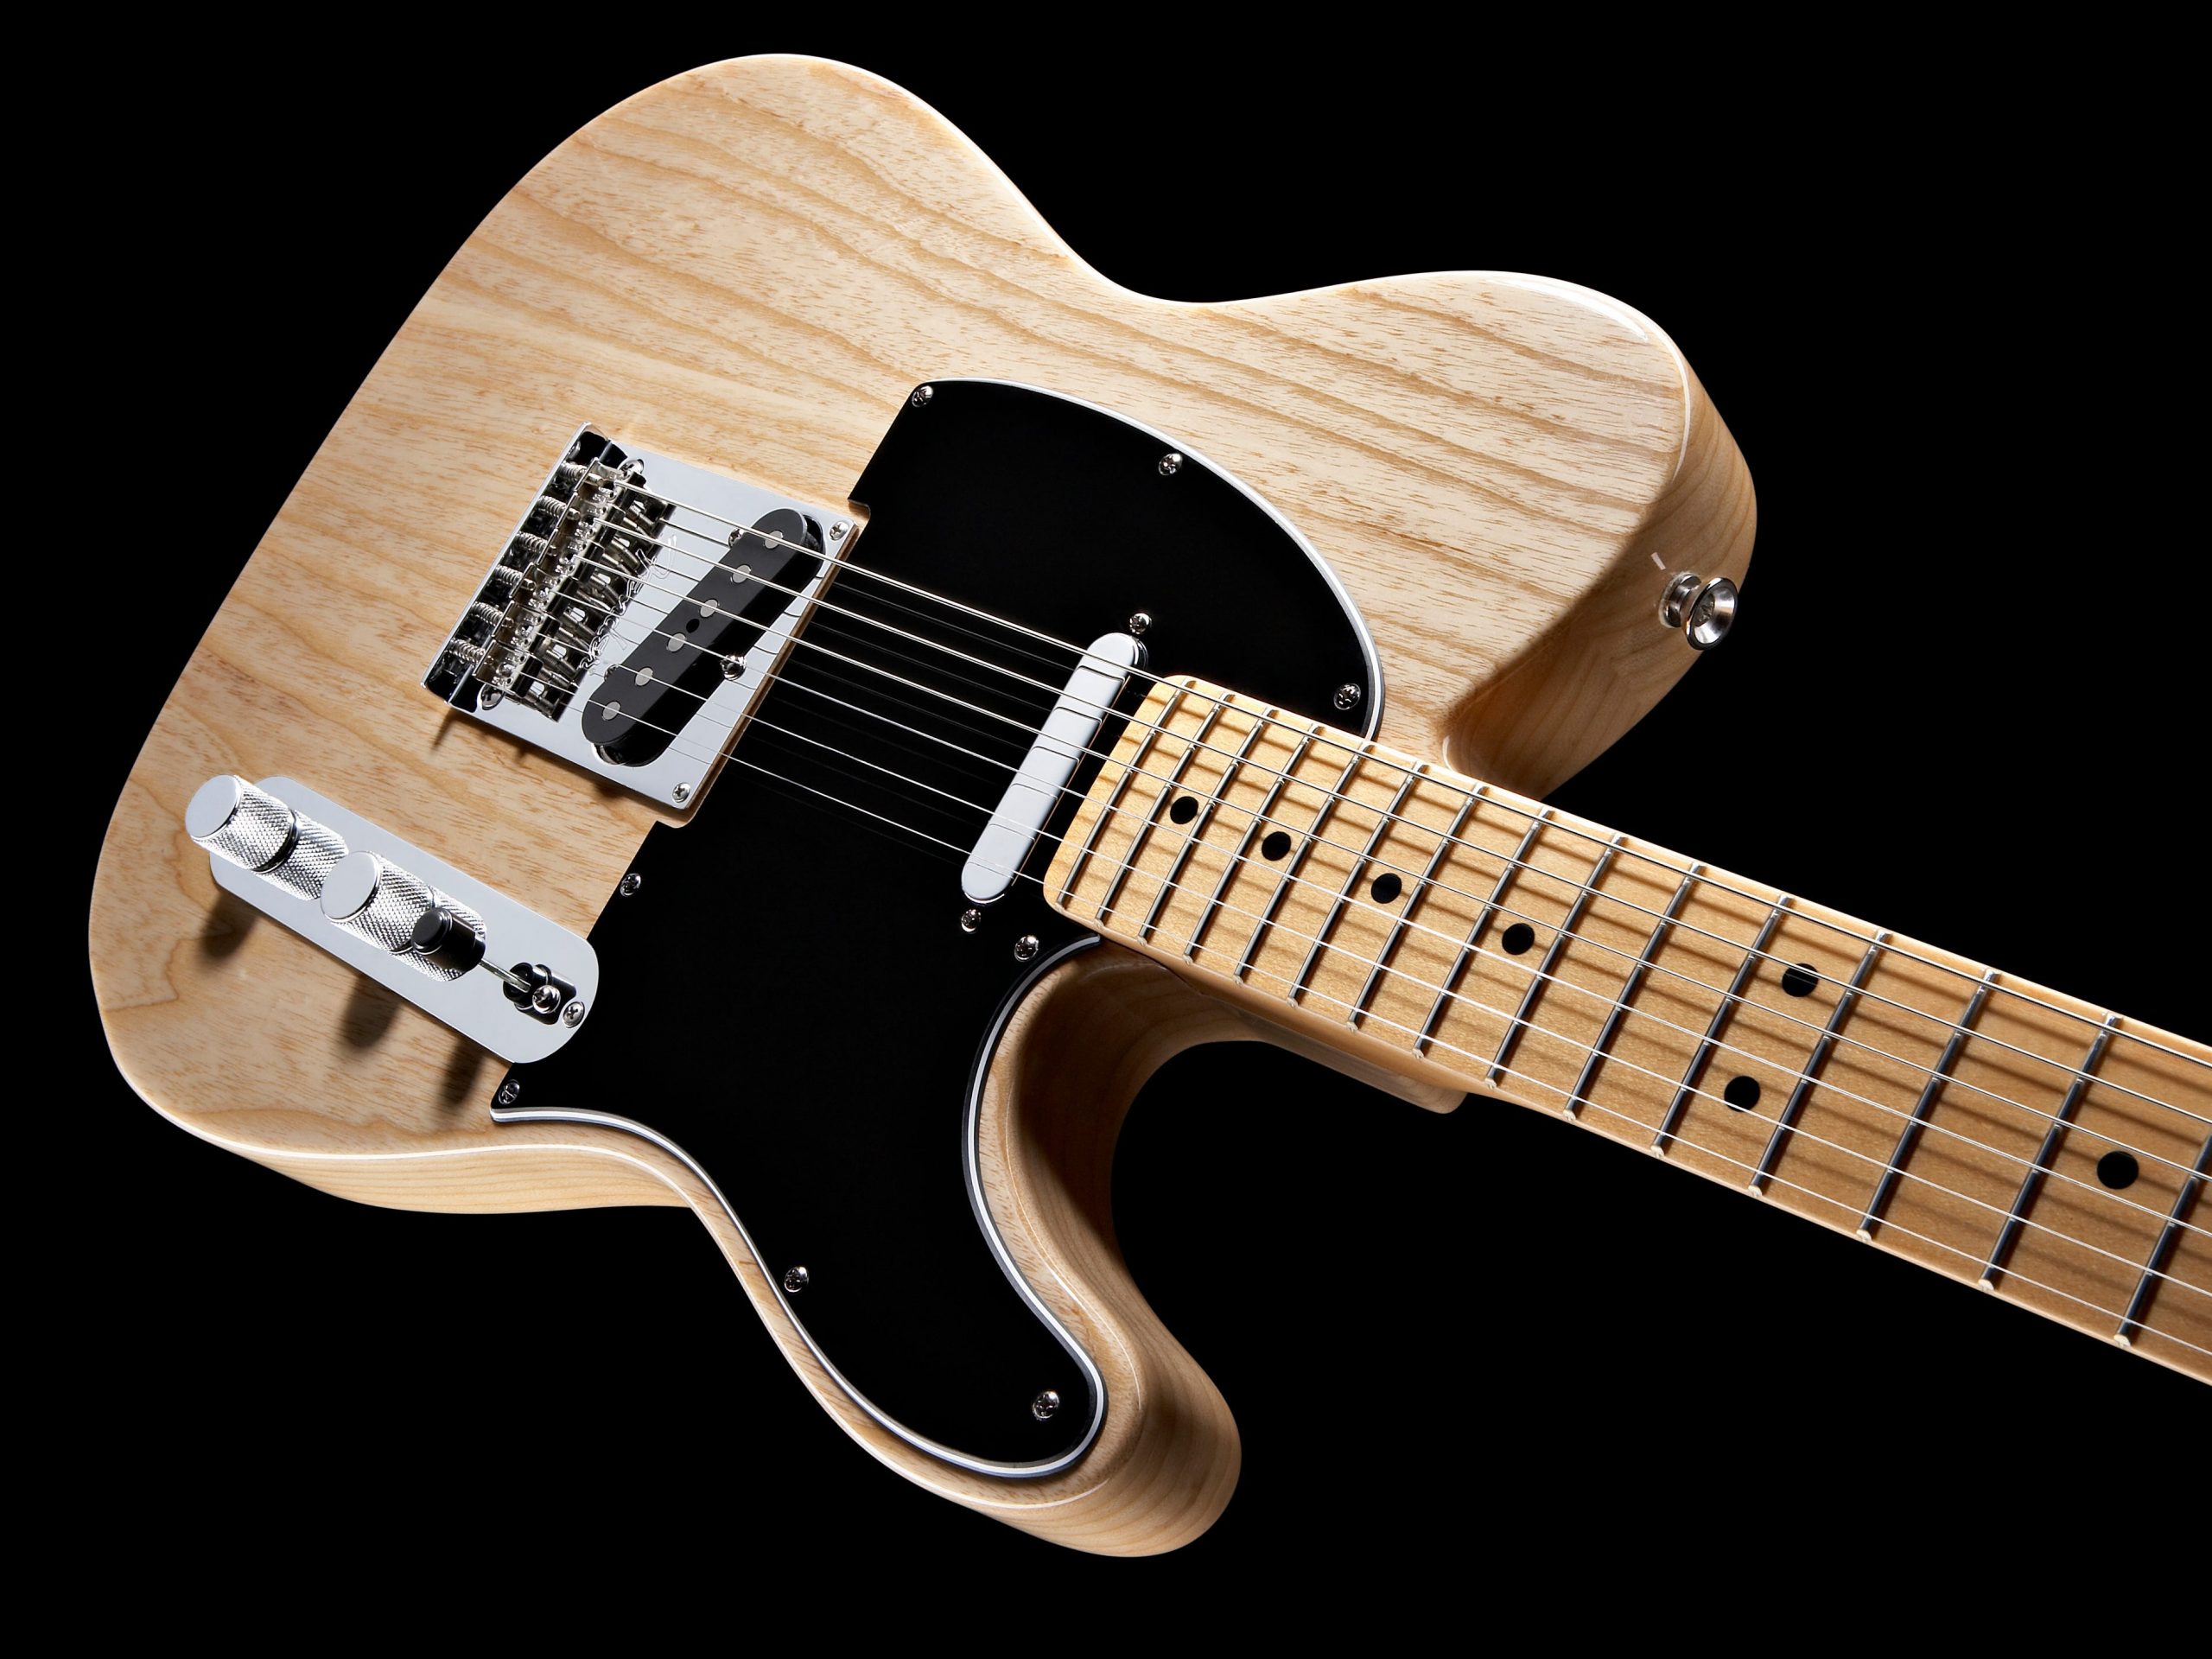 Fender Telecaster with Ash body and Natural finish by Fender